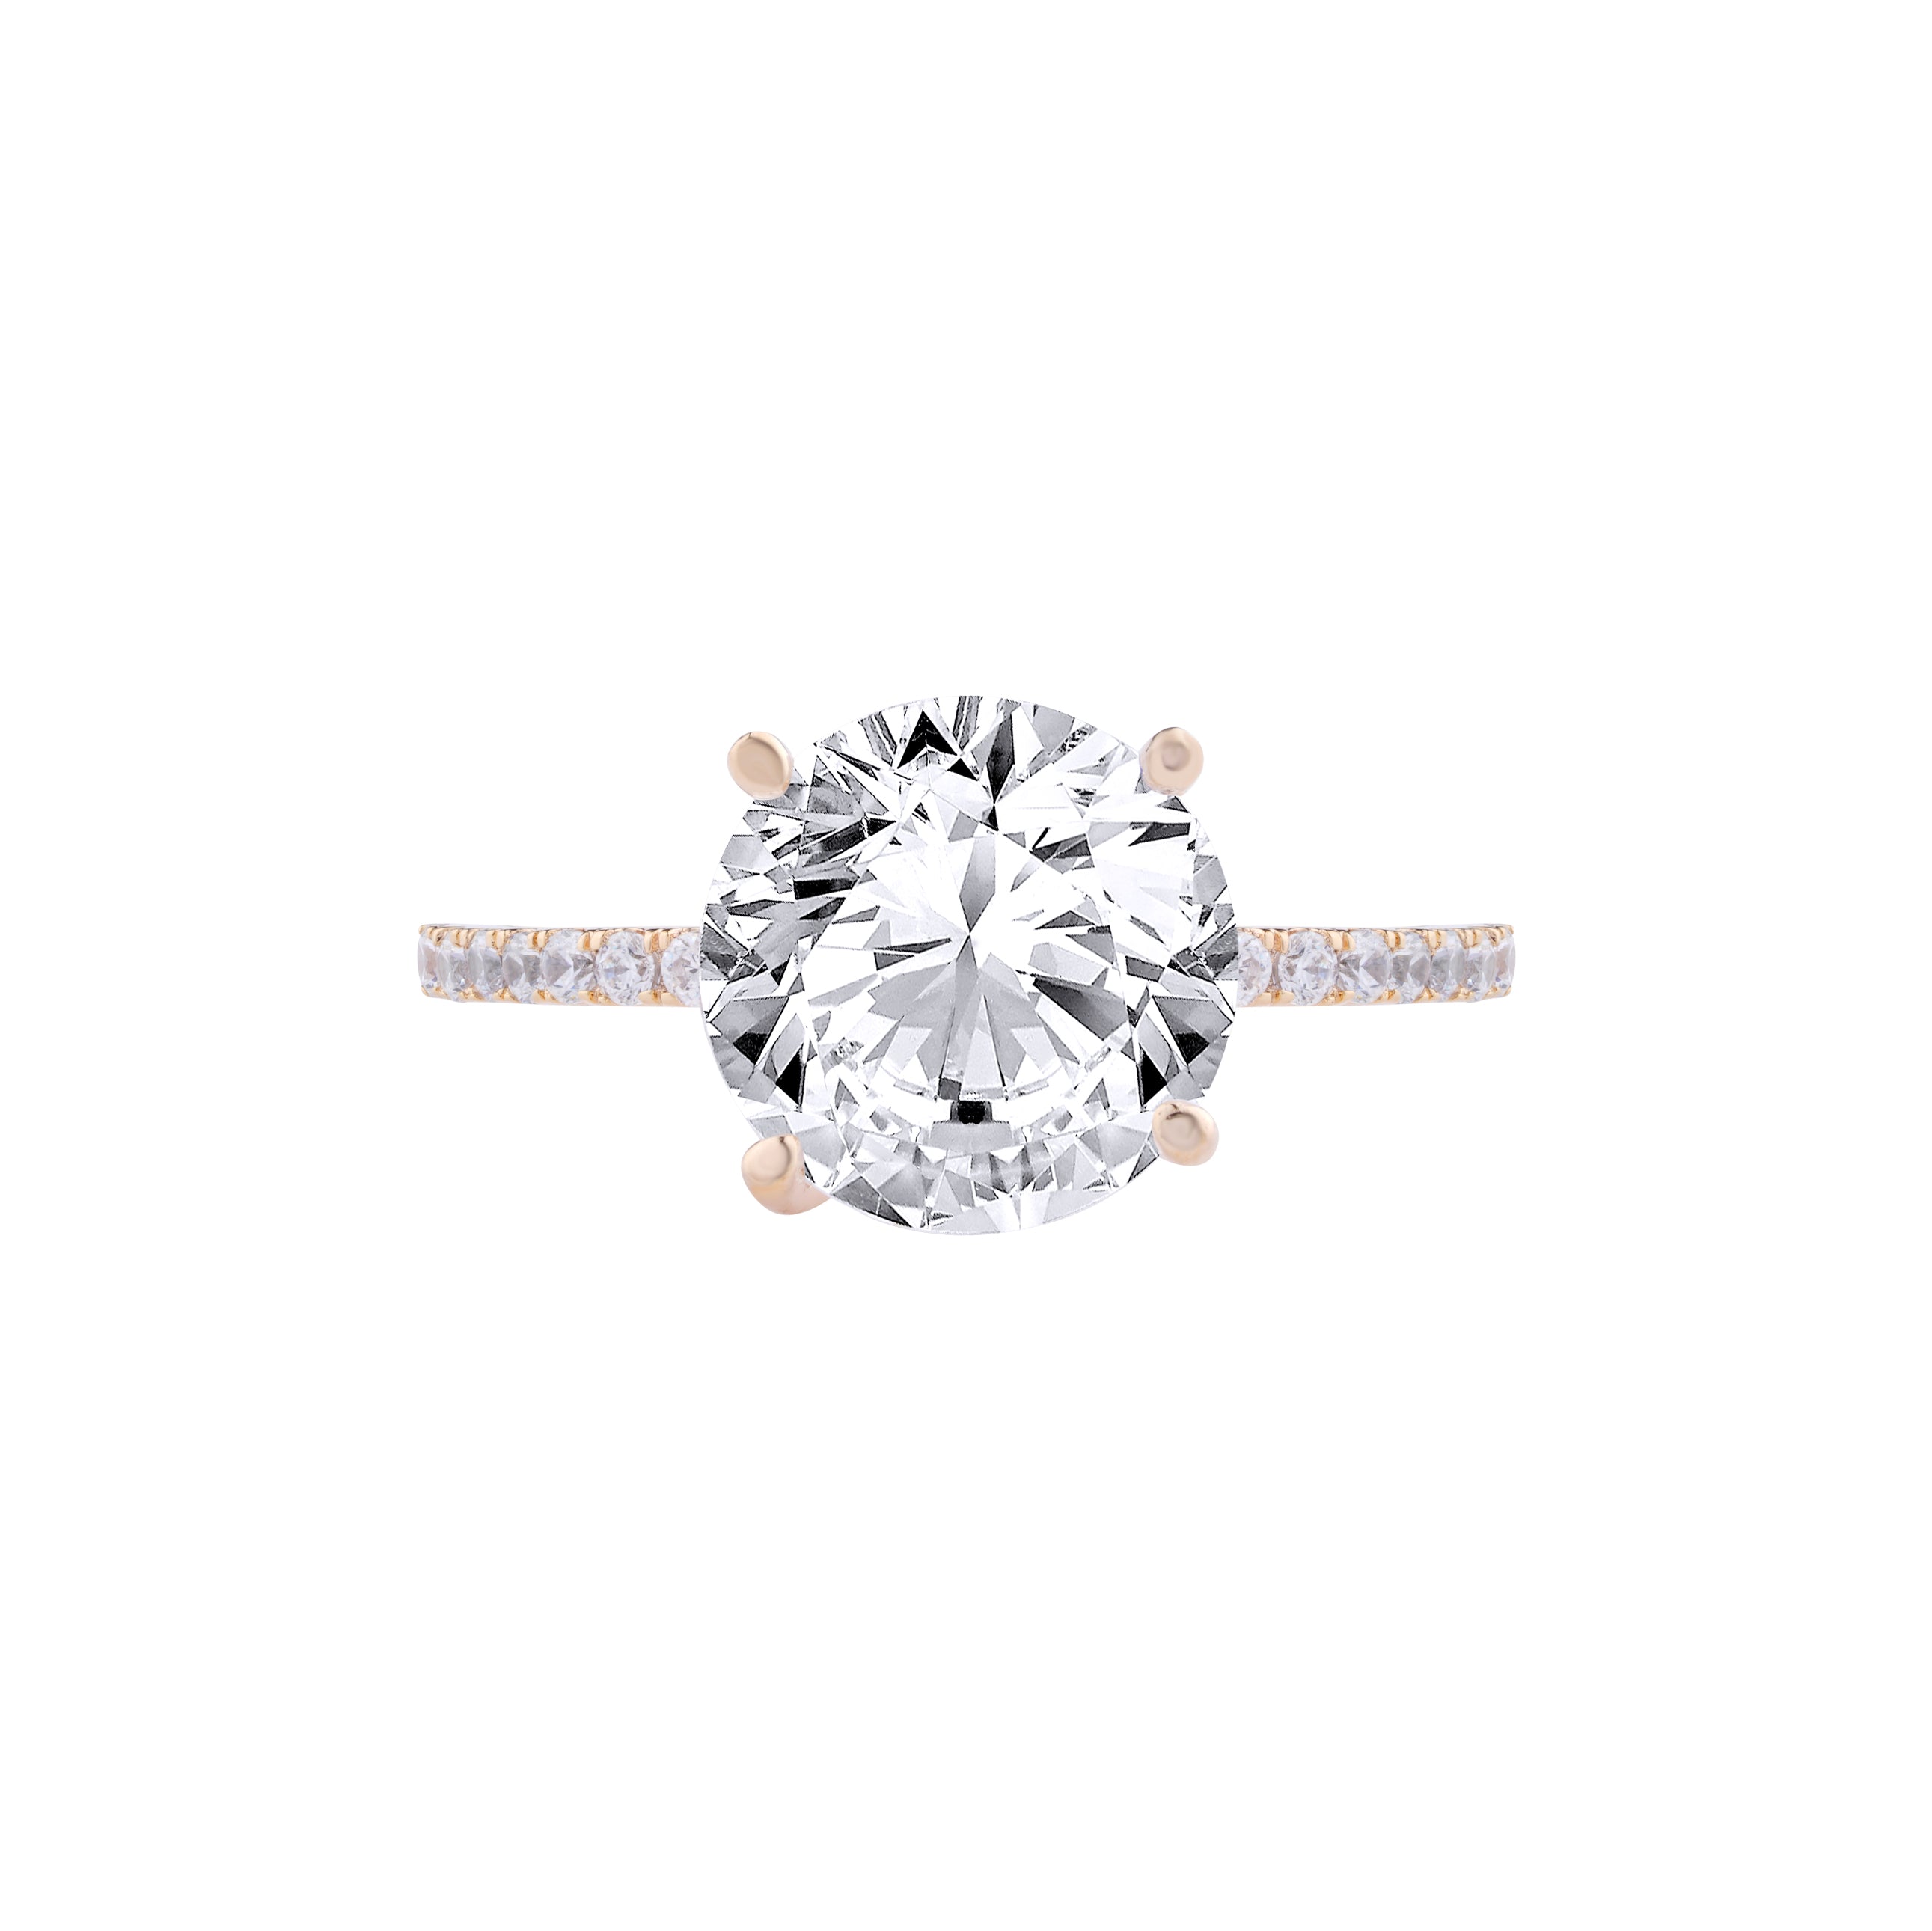 2 carat Rose gold Engagement Ring, 4 Prong Classic Solitaire Wedding Ring